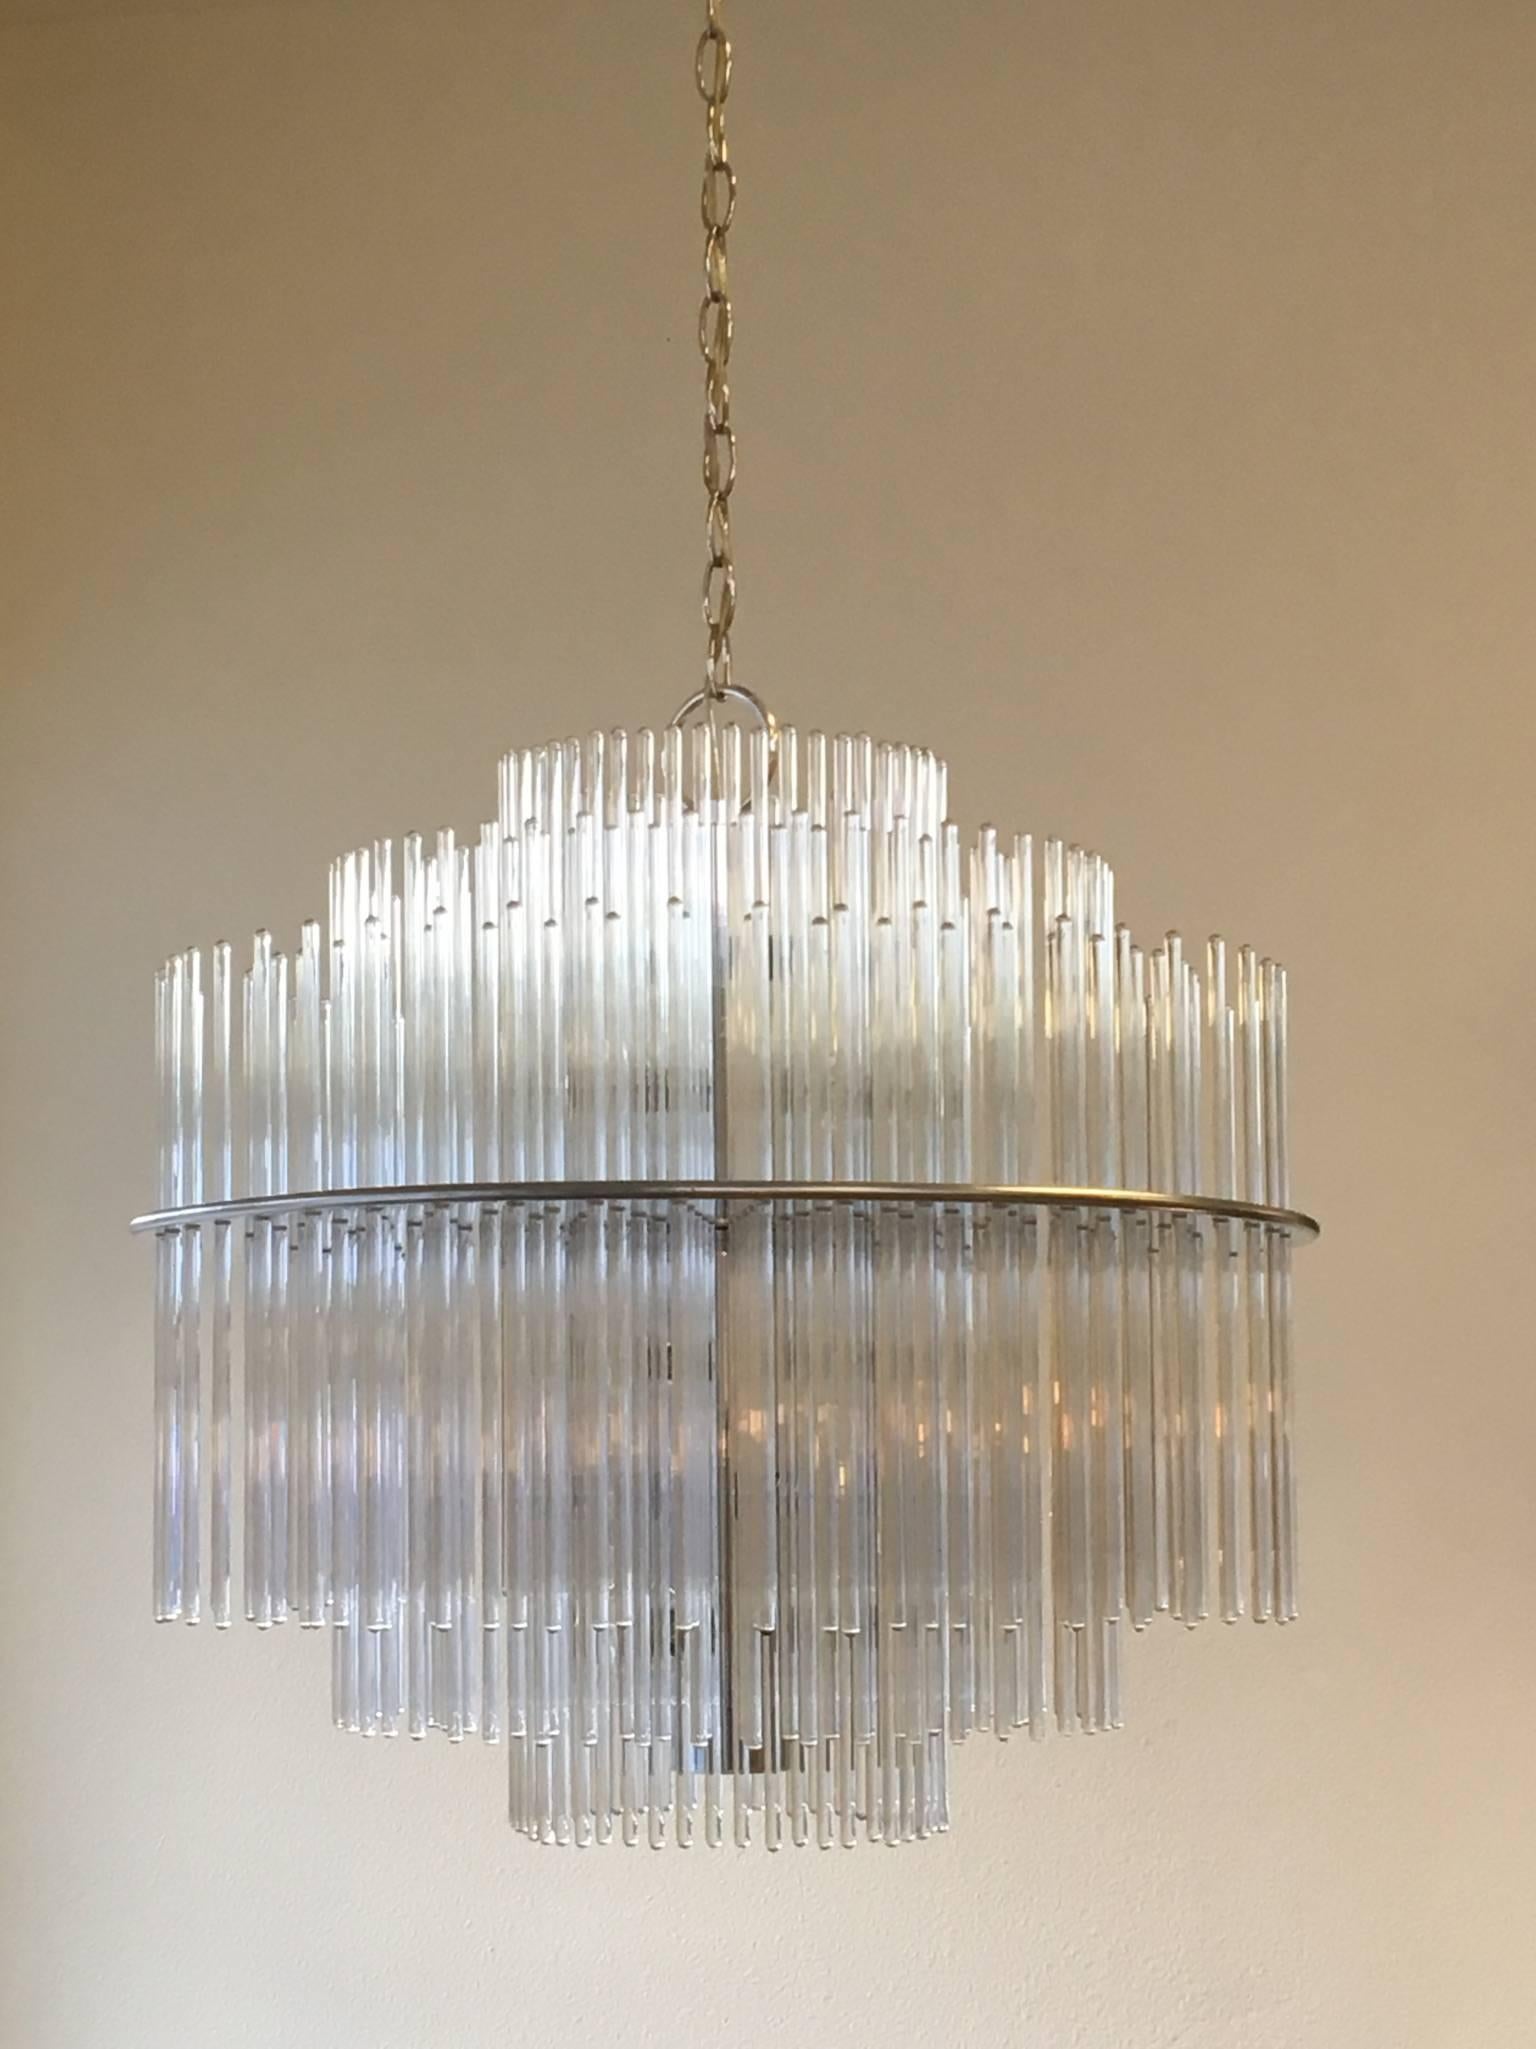 American Chrome and Glass Chandelier by Lightolier